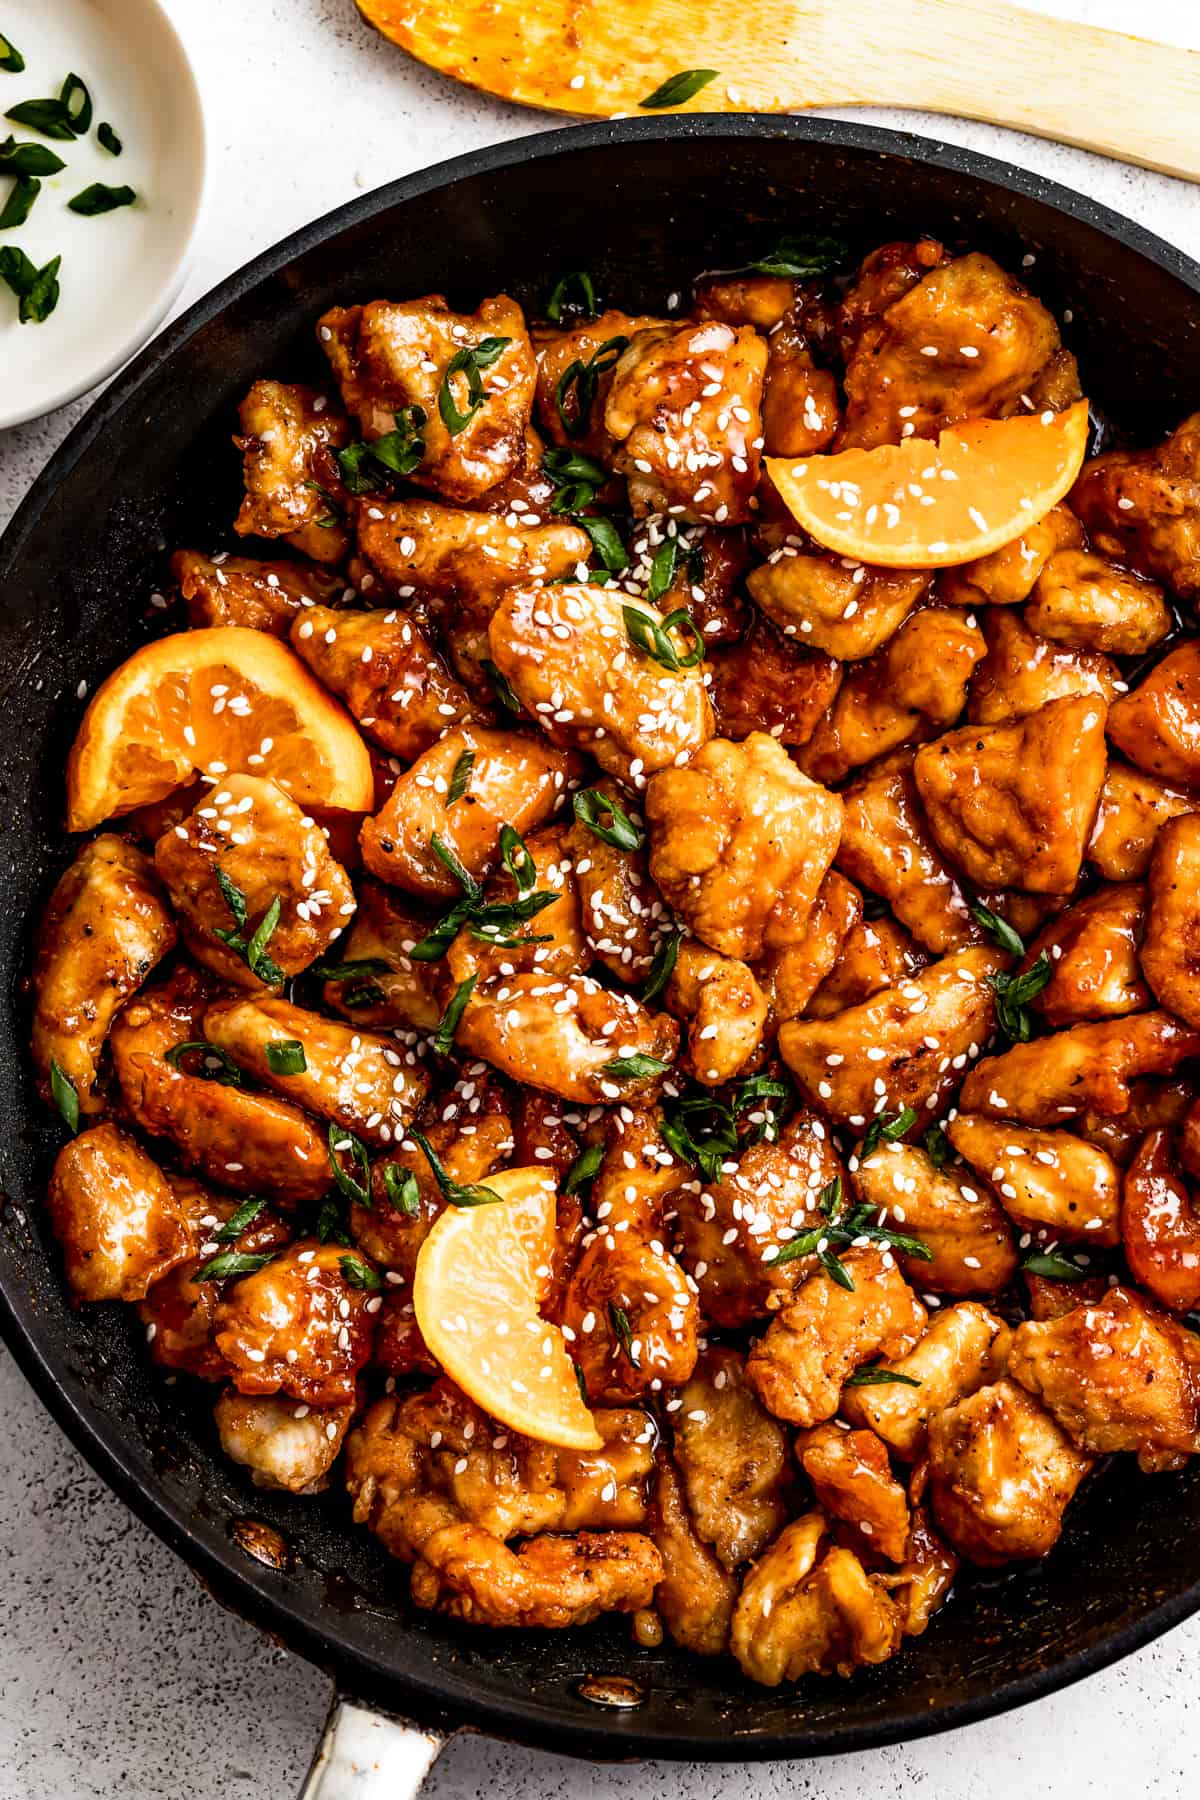 mandarin chicken in a pan, garnished with orange slices, green onions, and sesame seeds.